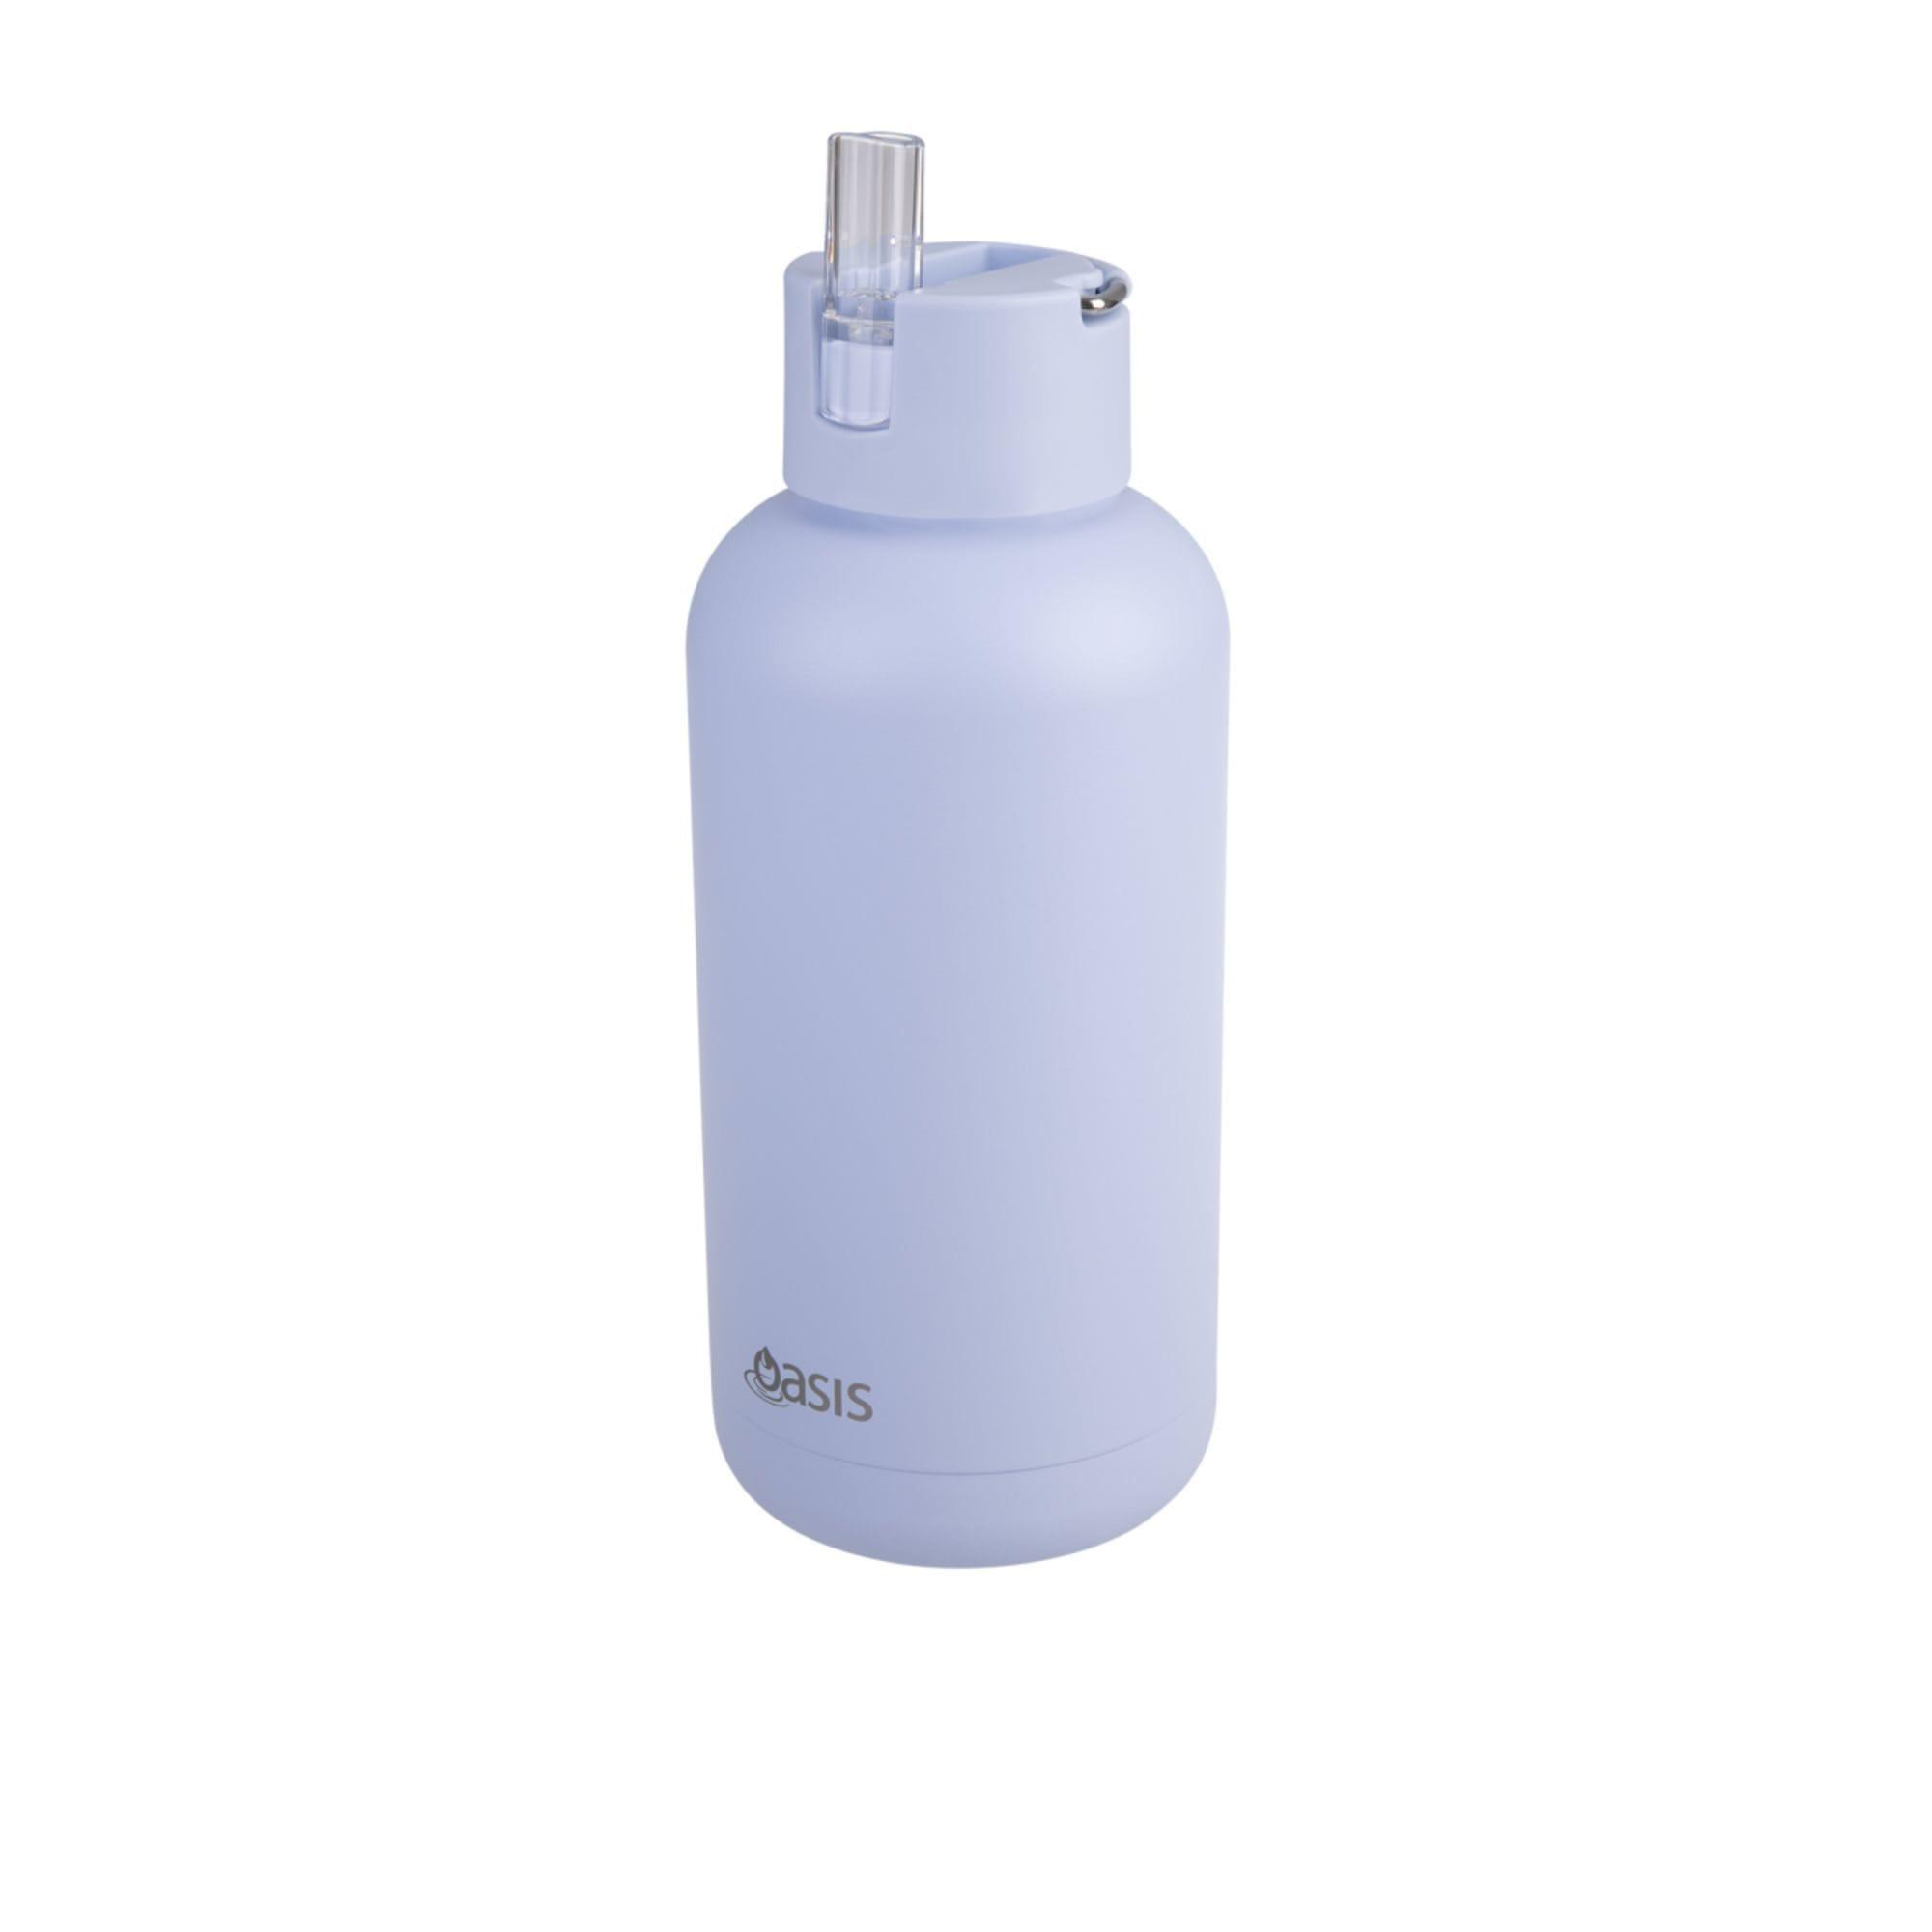 Oasis Moda Triple Wall Insulated Drink Bottle 1.5L Periwinkle Image 4